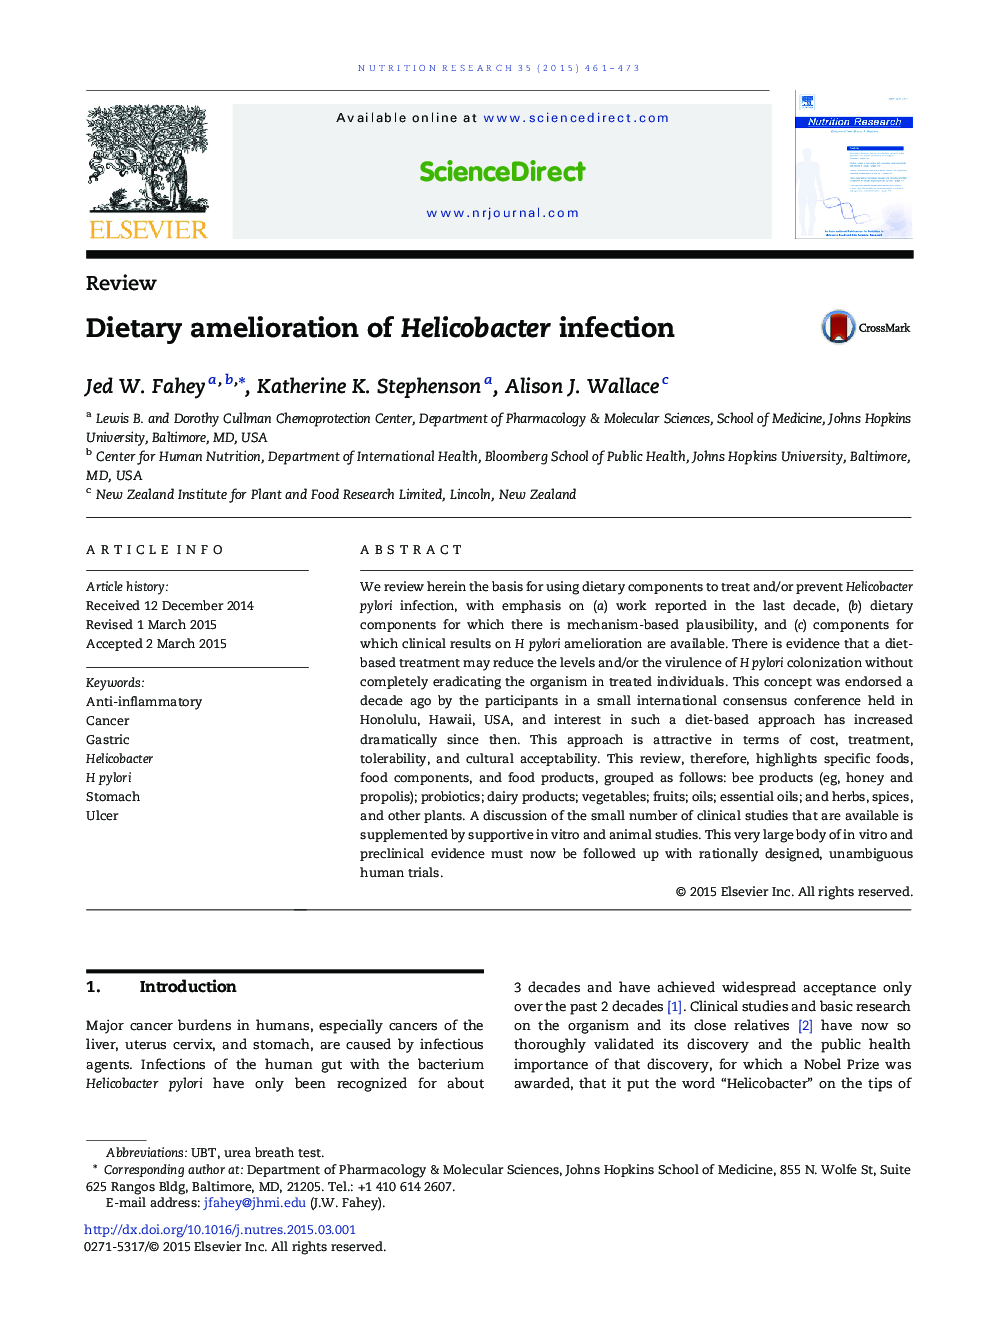 ReviewDietary amelioration of Helicobacter infection